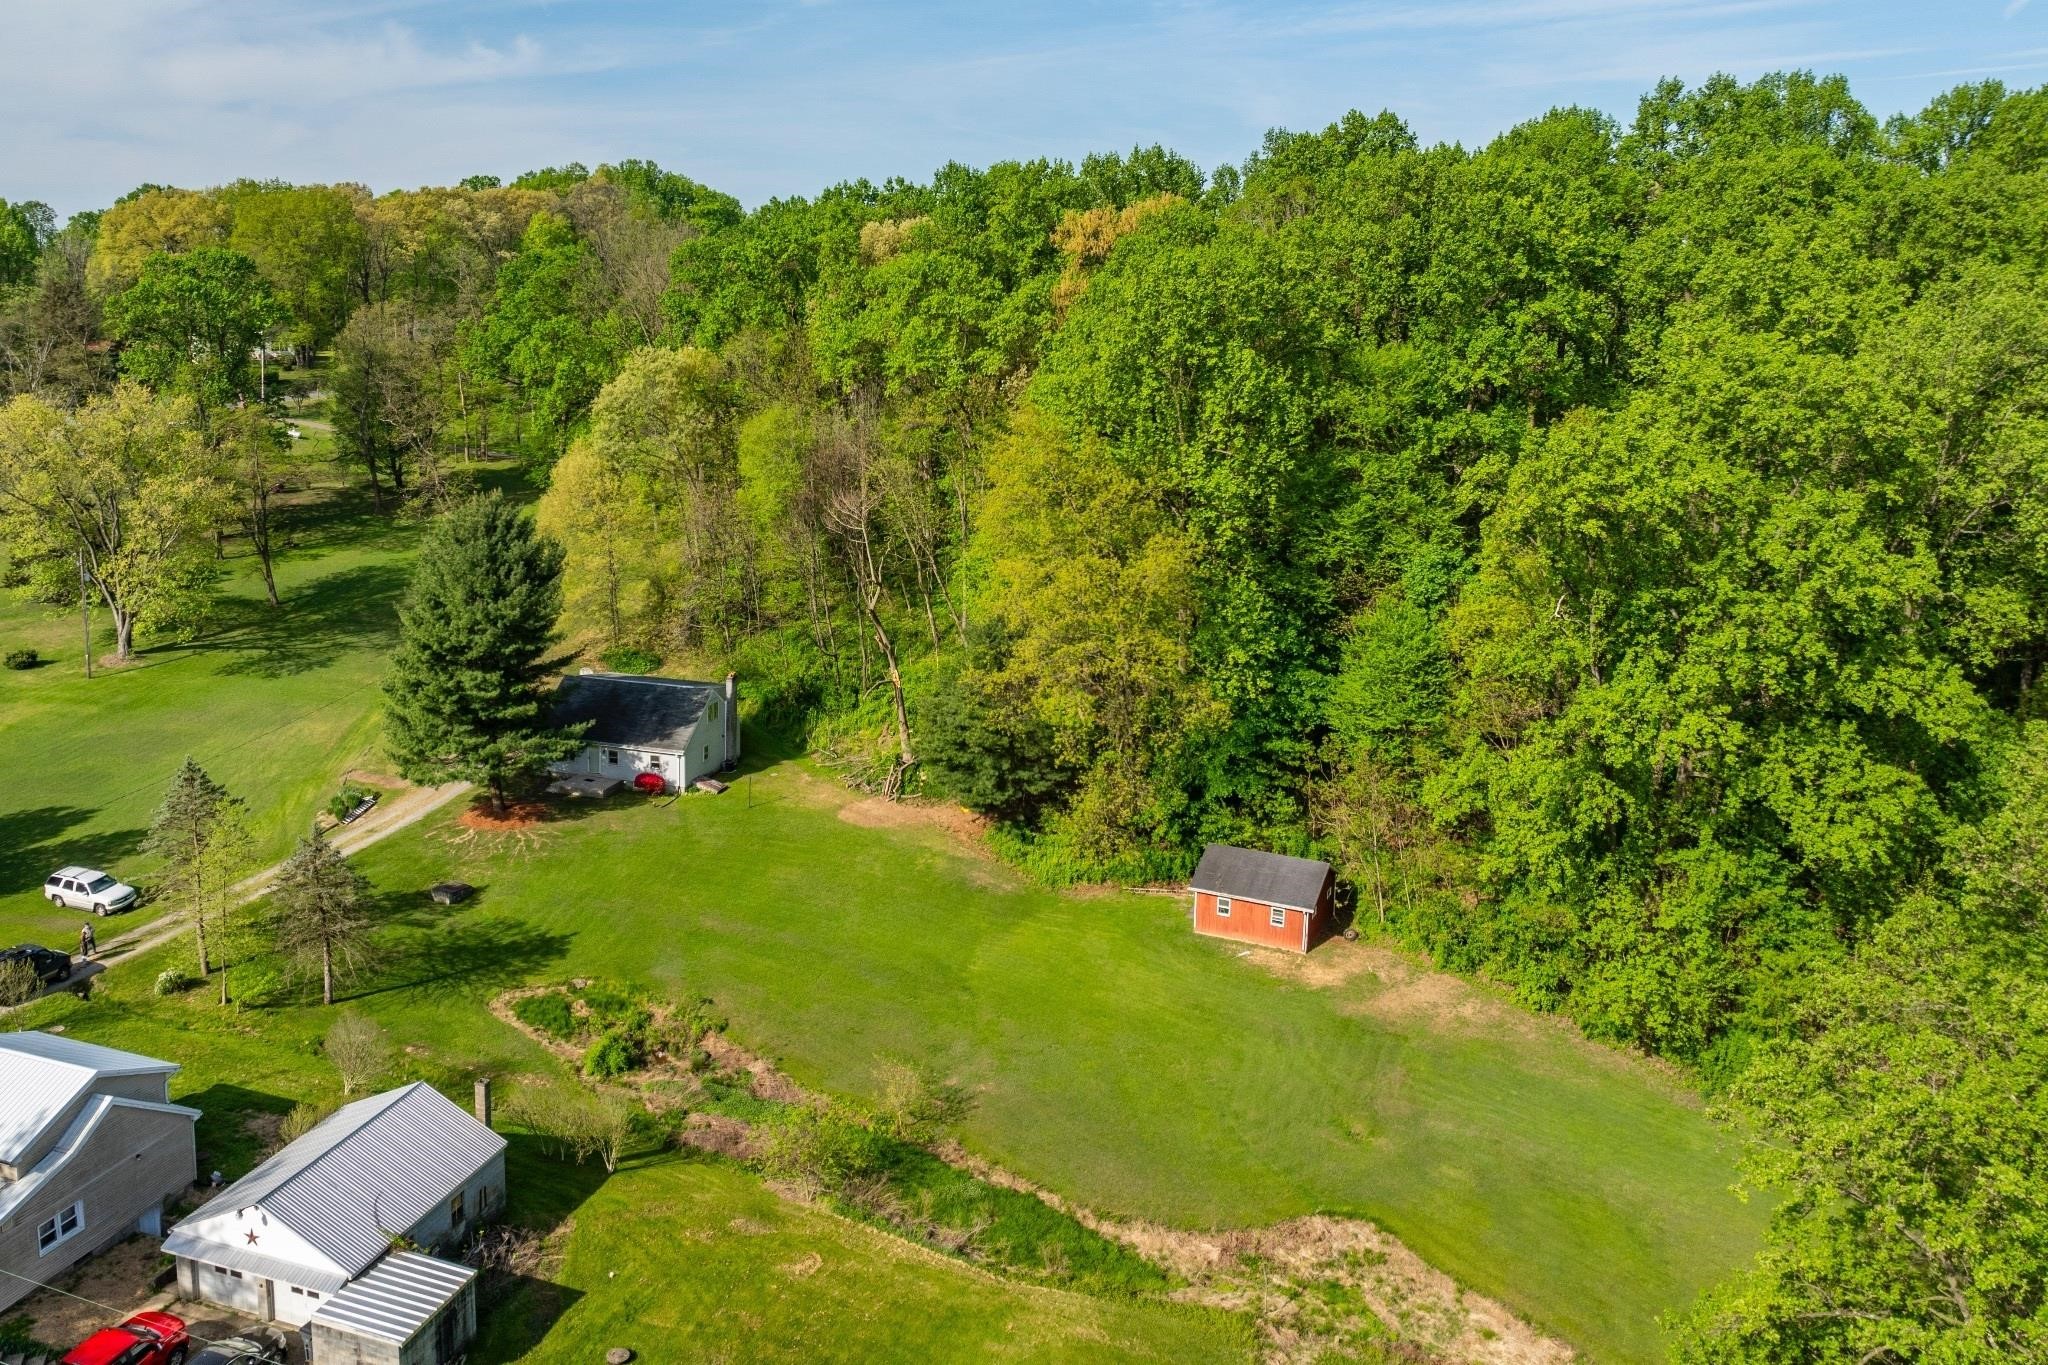 1048 RAWLINSVILLE ROAD, WILLOW STREET (24 ACRES)